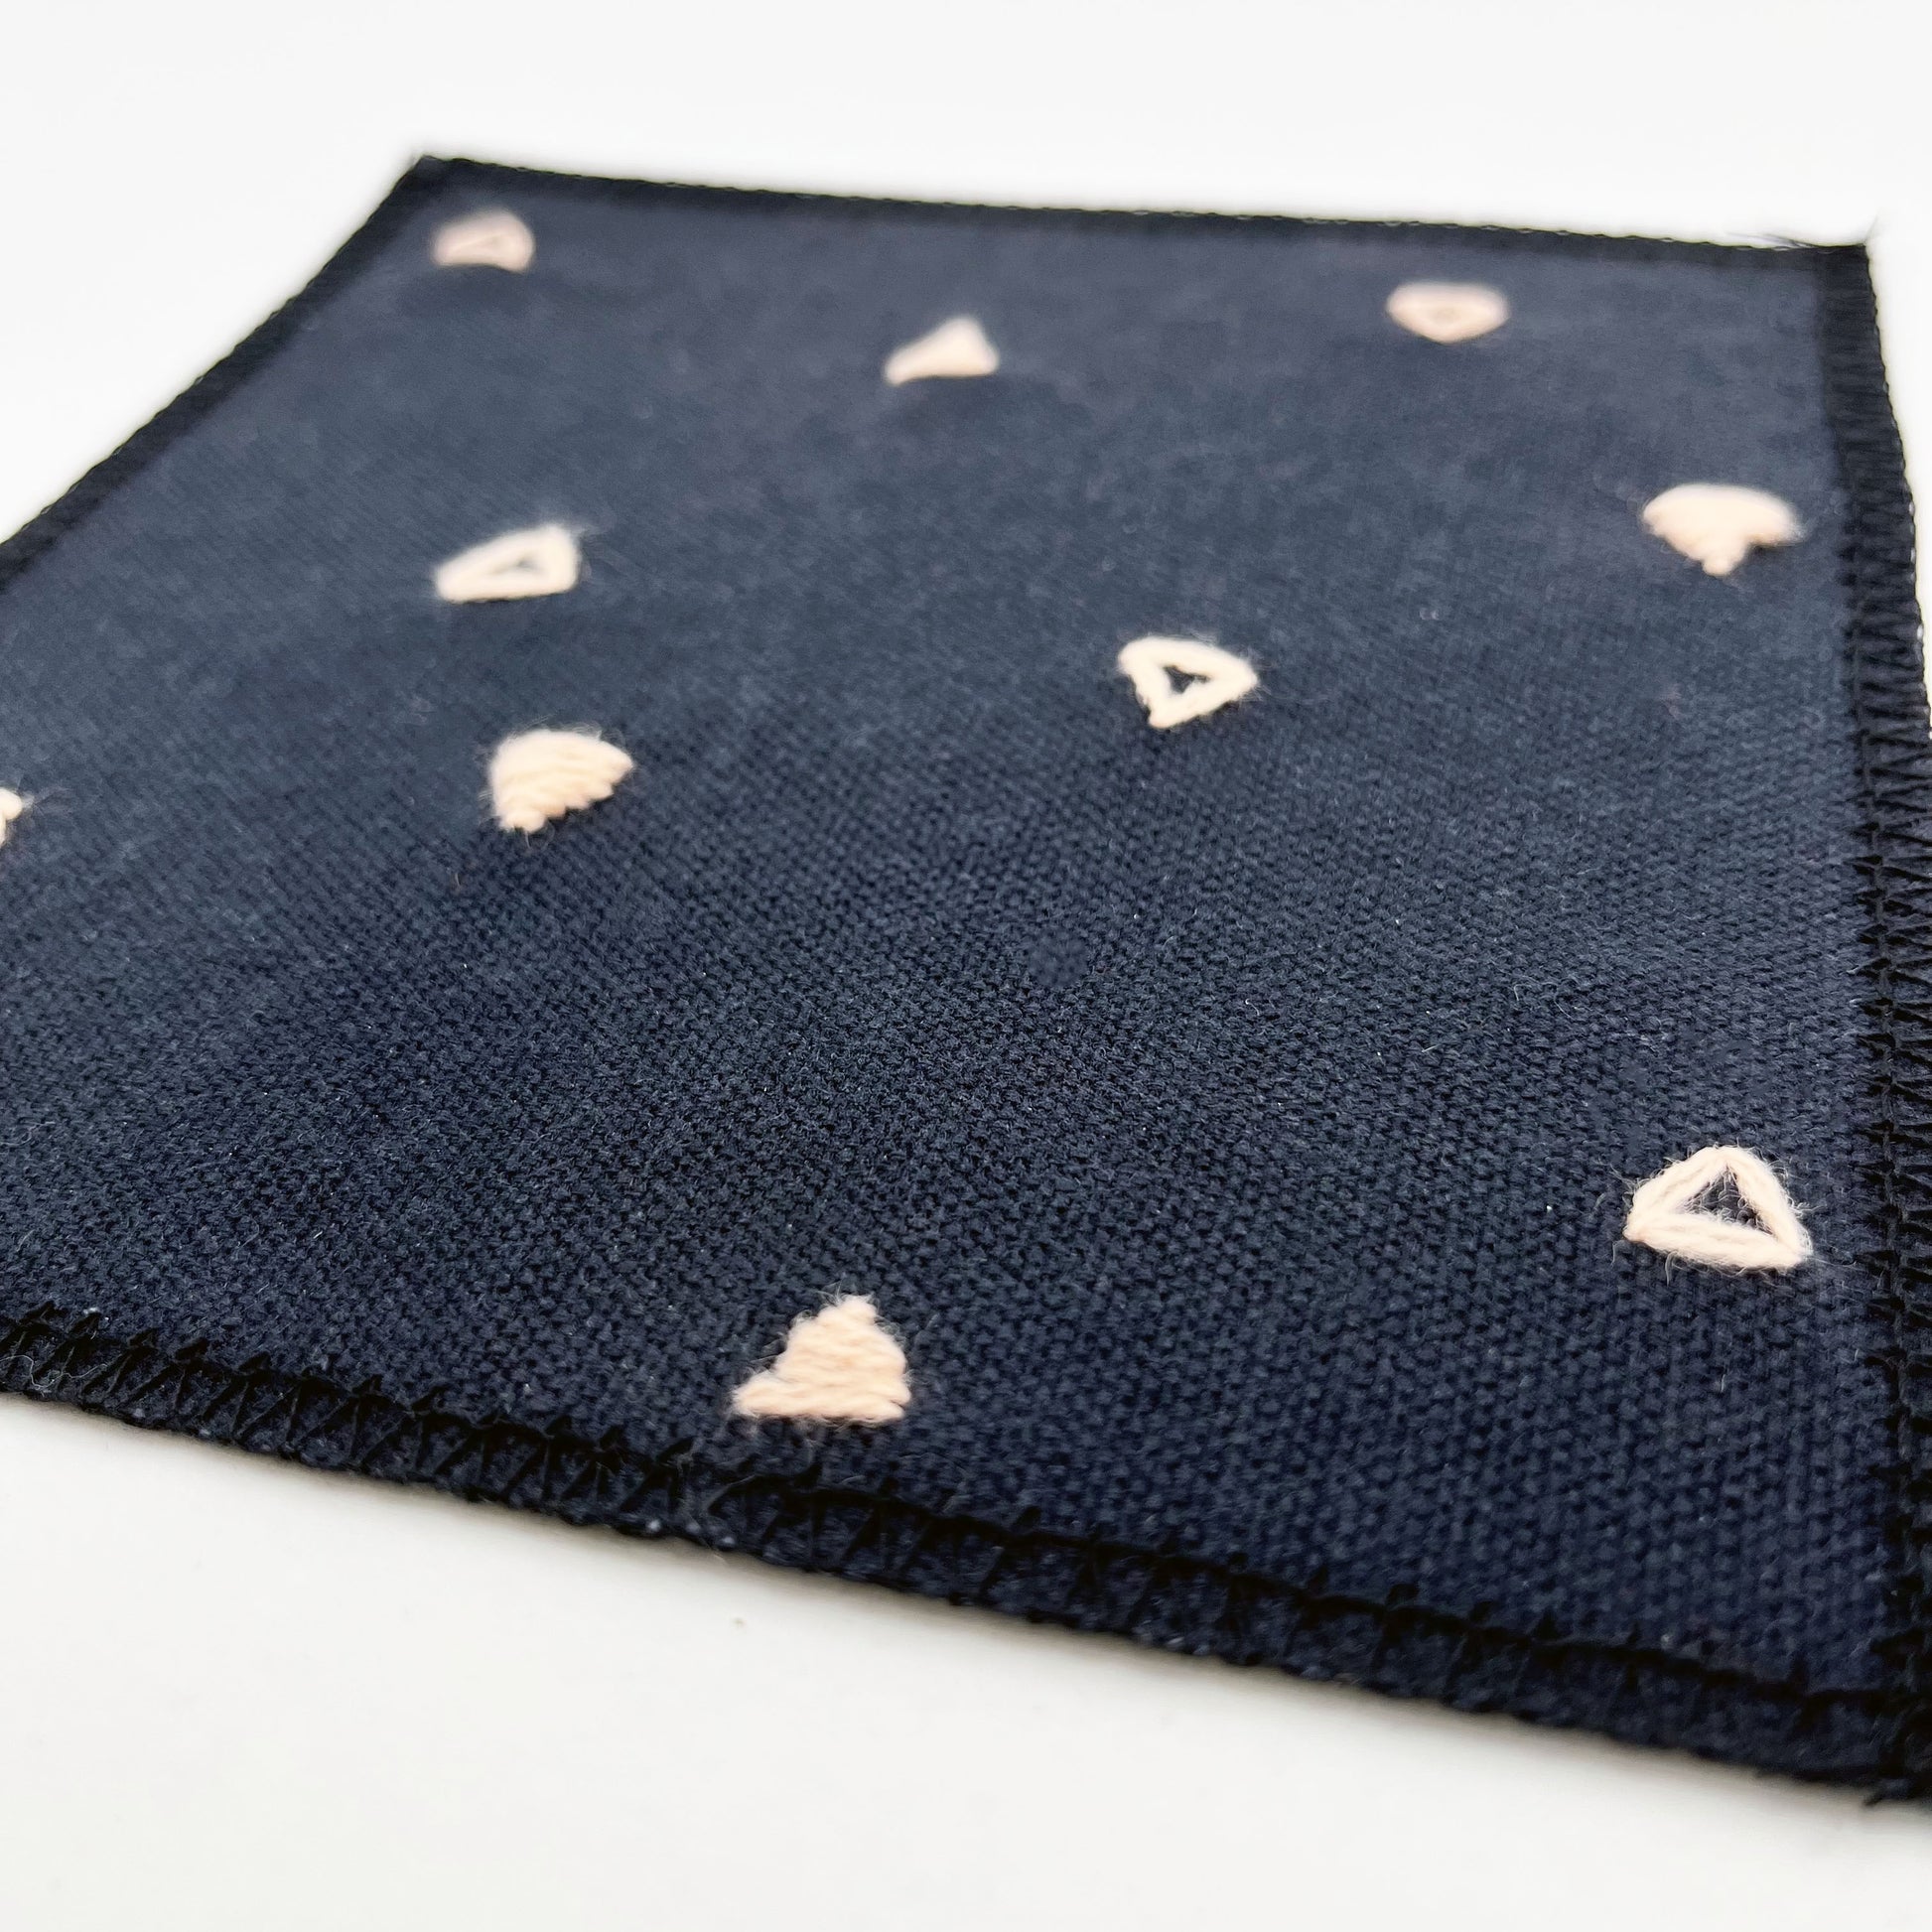 close up angled view of a square patch made out of black canvas, handstitched with scattered peach triangles, some as outlines some with a line fill, with overlocked edges, on a white background